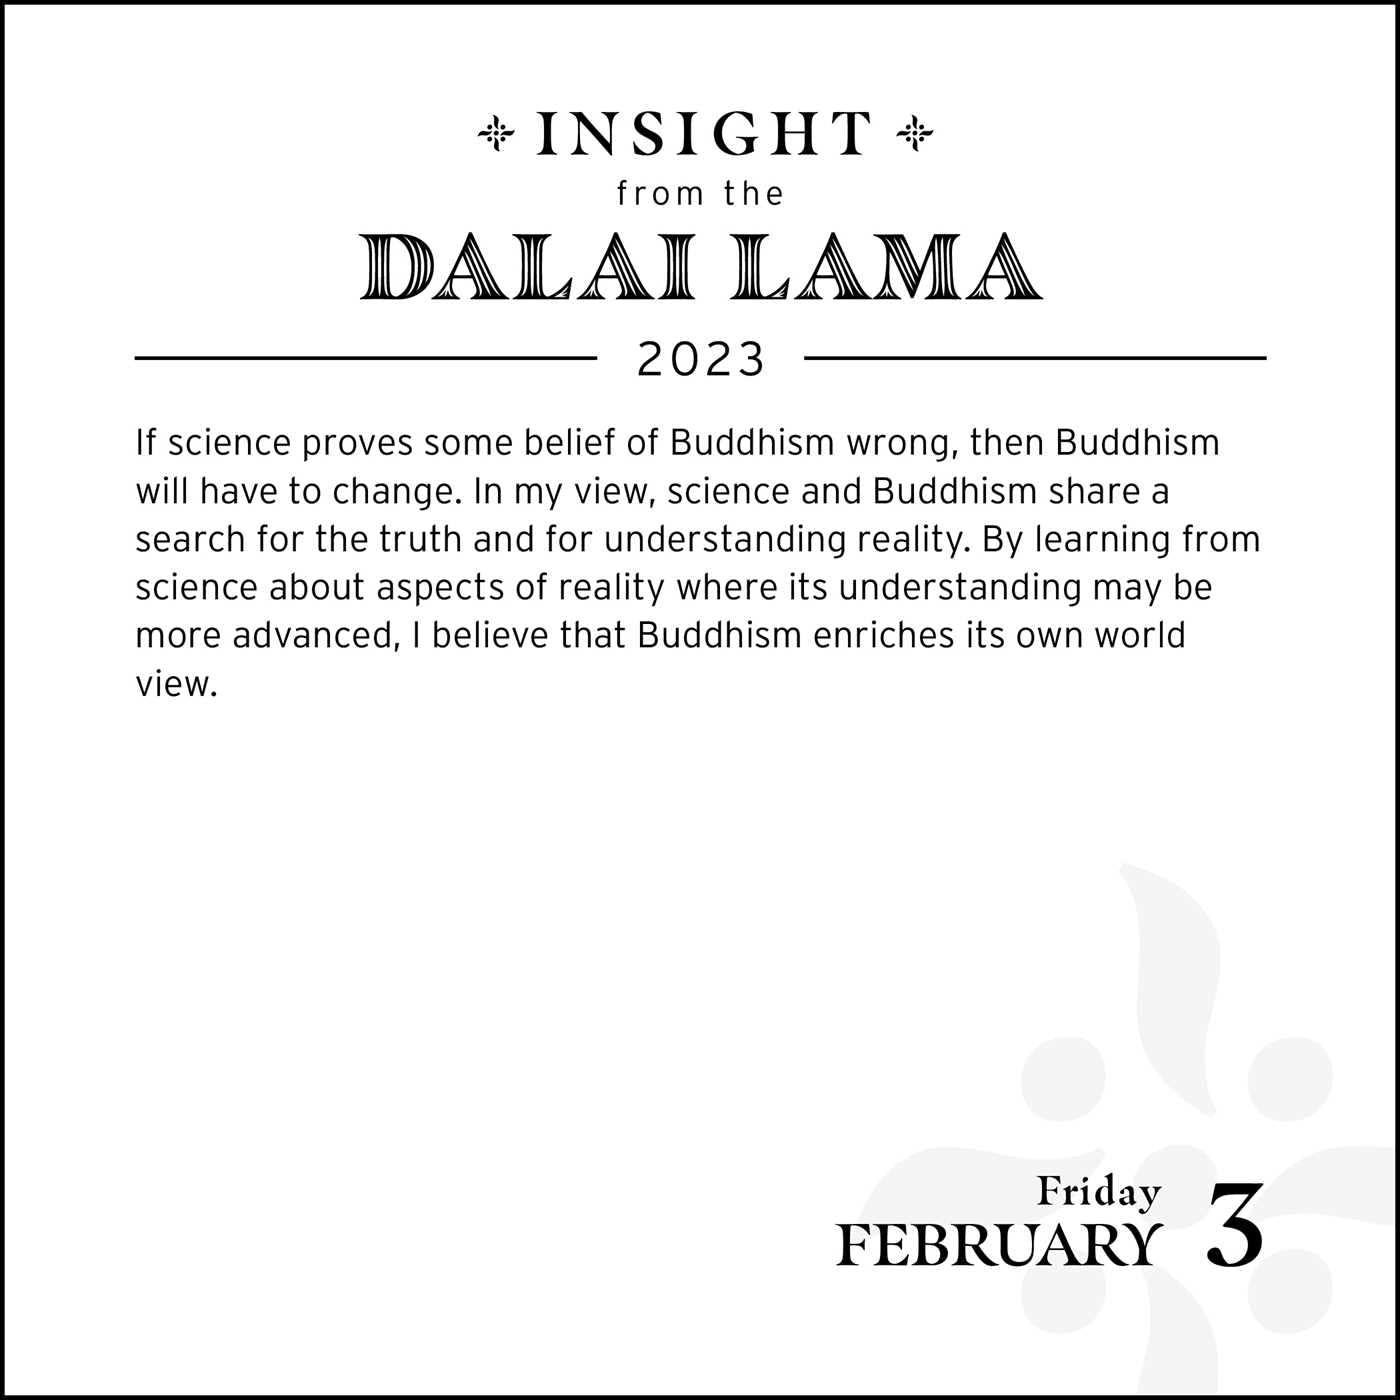 Insight from the Dalai Lama 2023 Day-to-Day Calendar